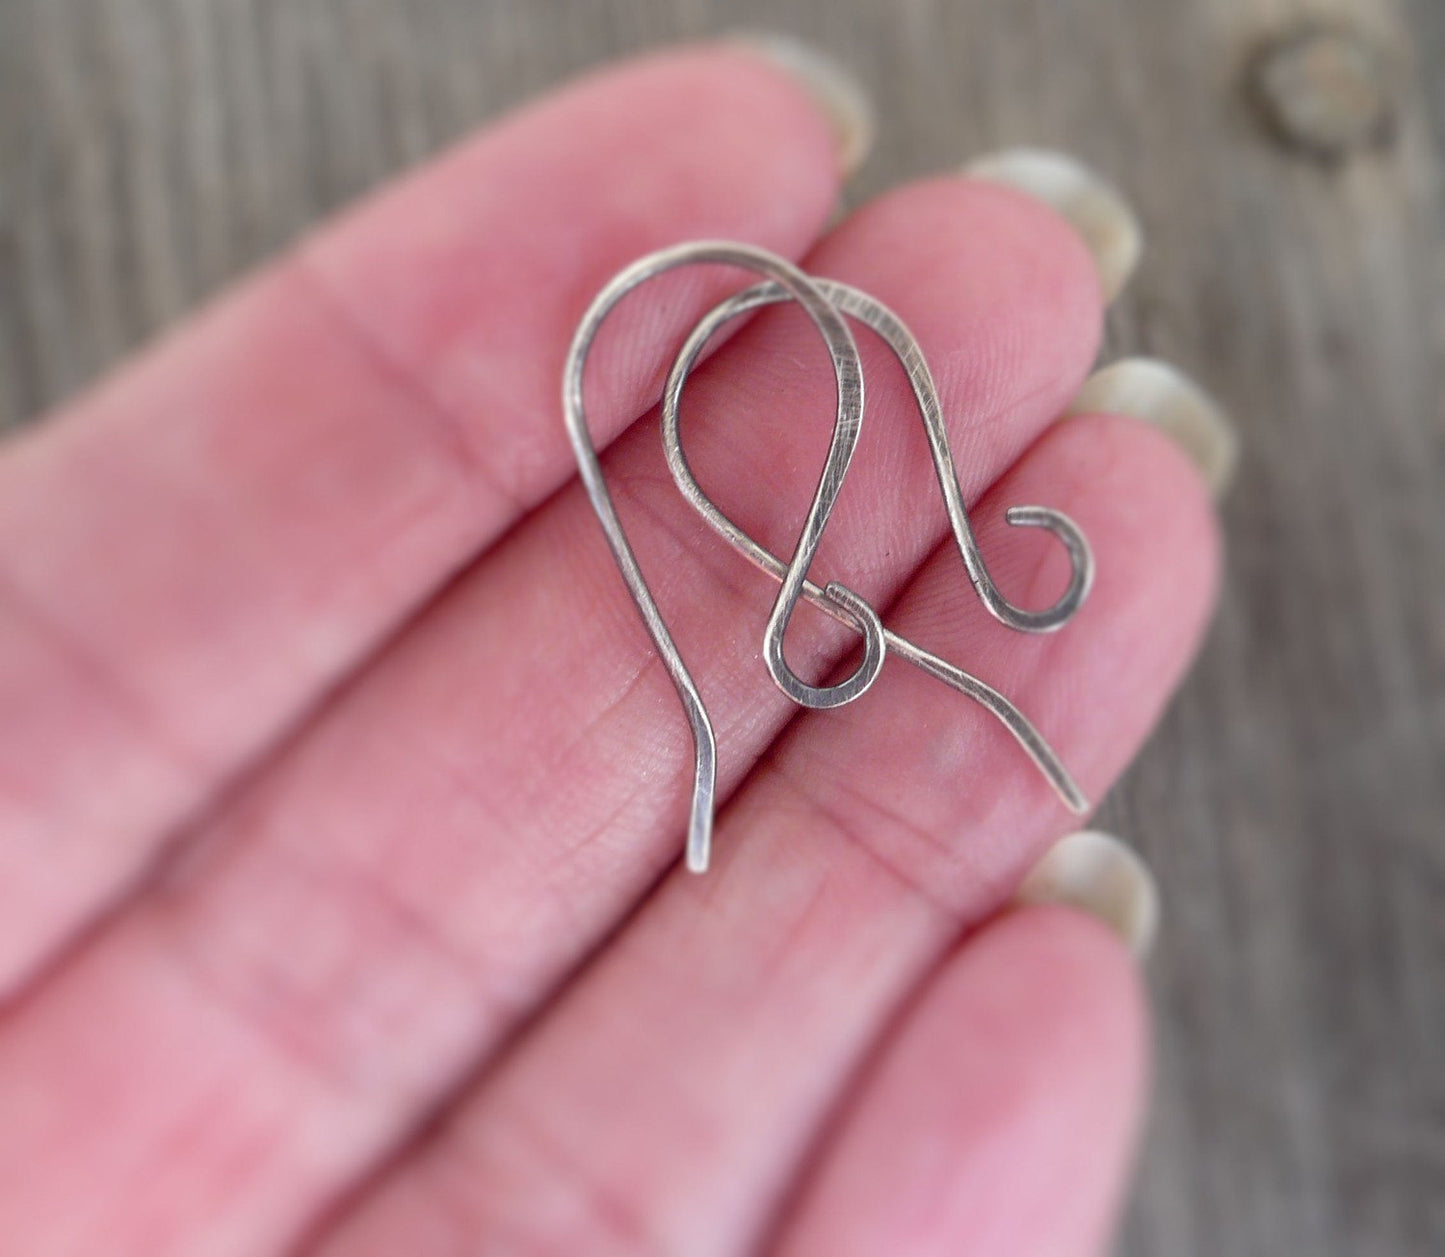 Solitaire Sterling Silver Earwires - Handmade. Heavily Oxidized